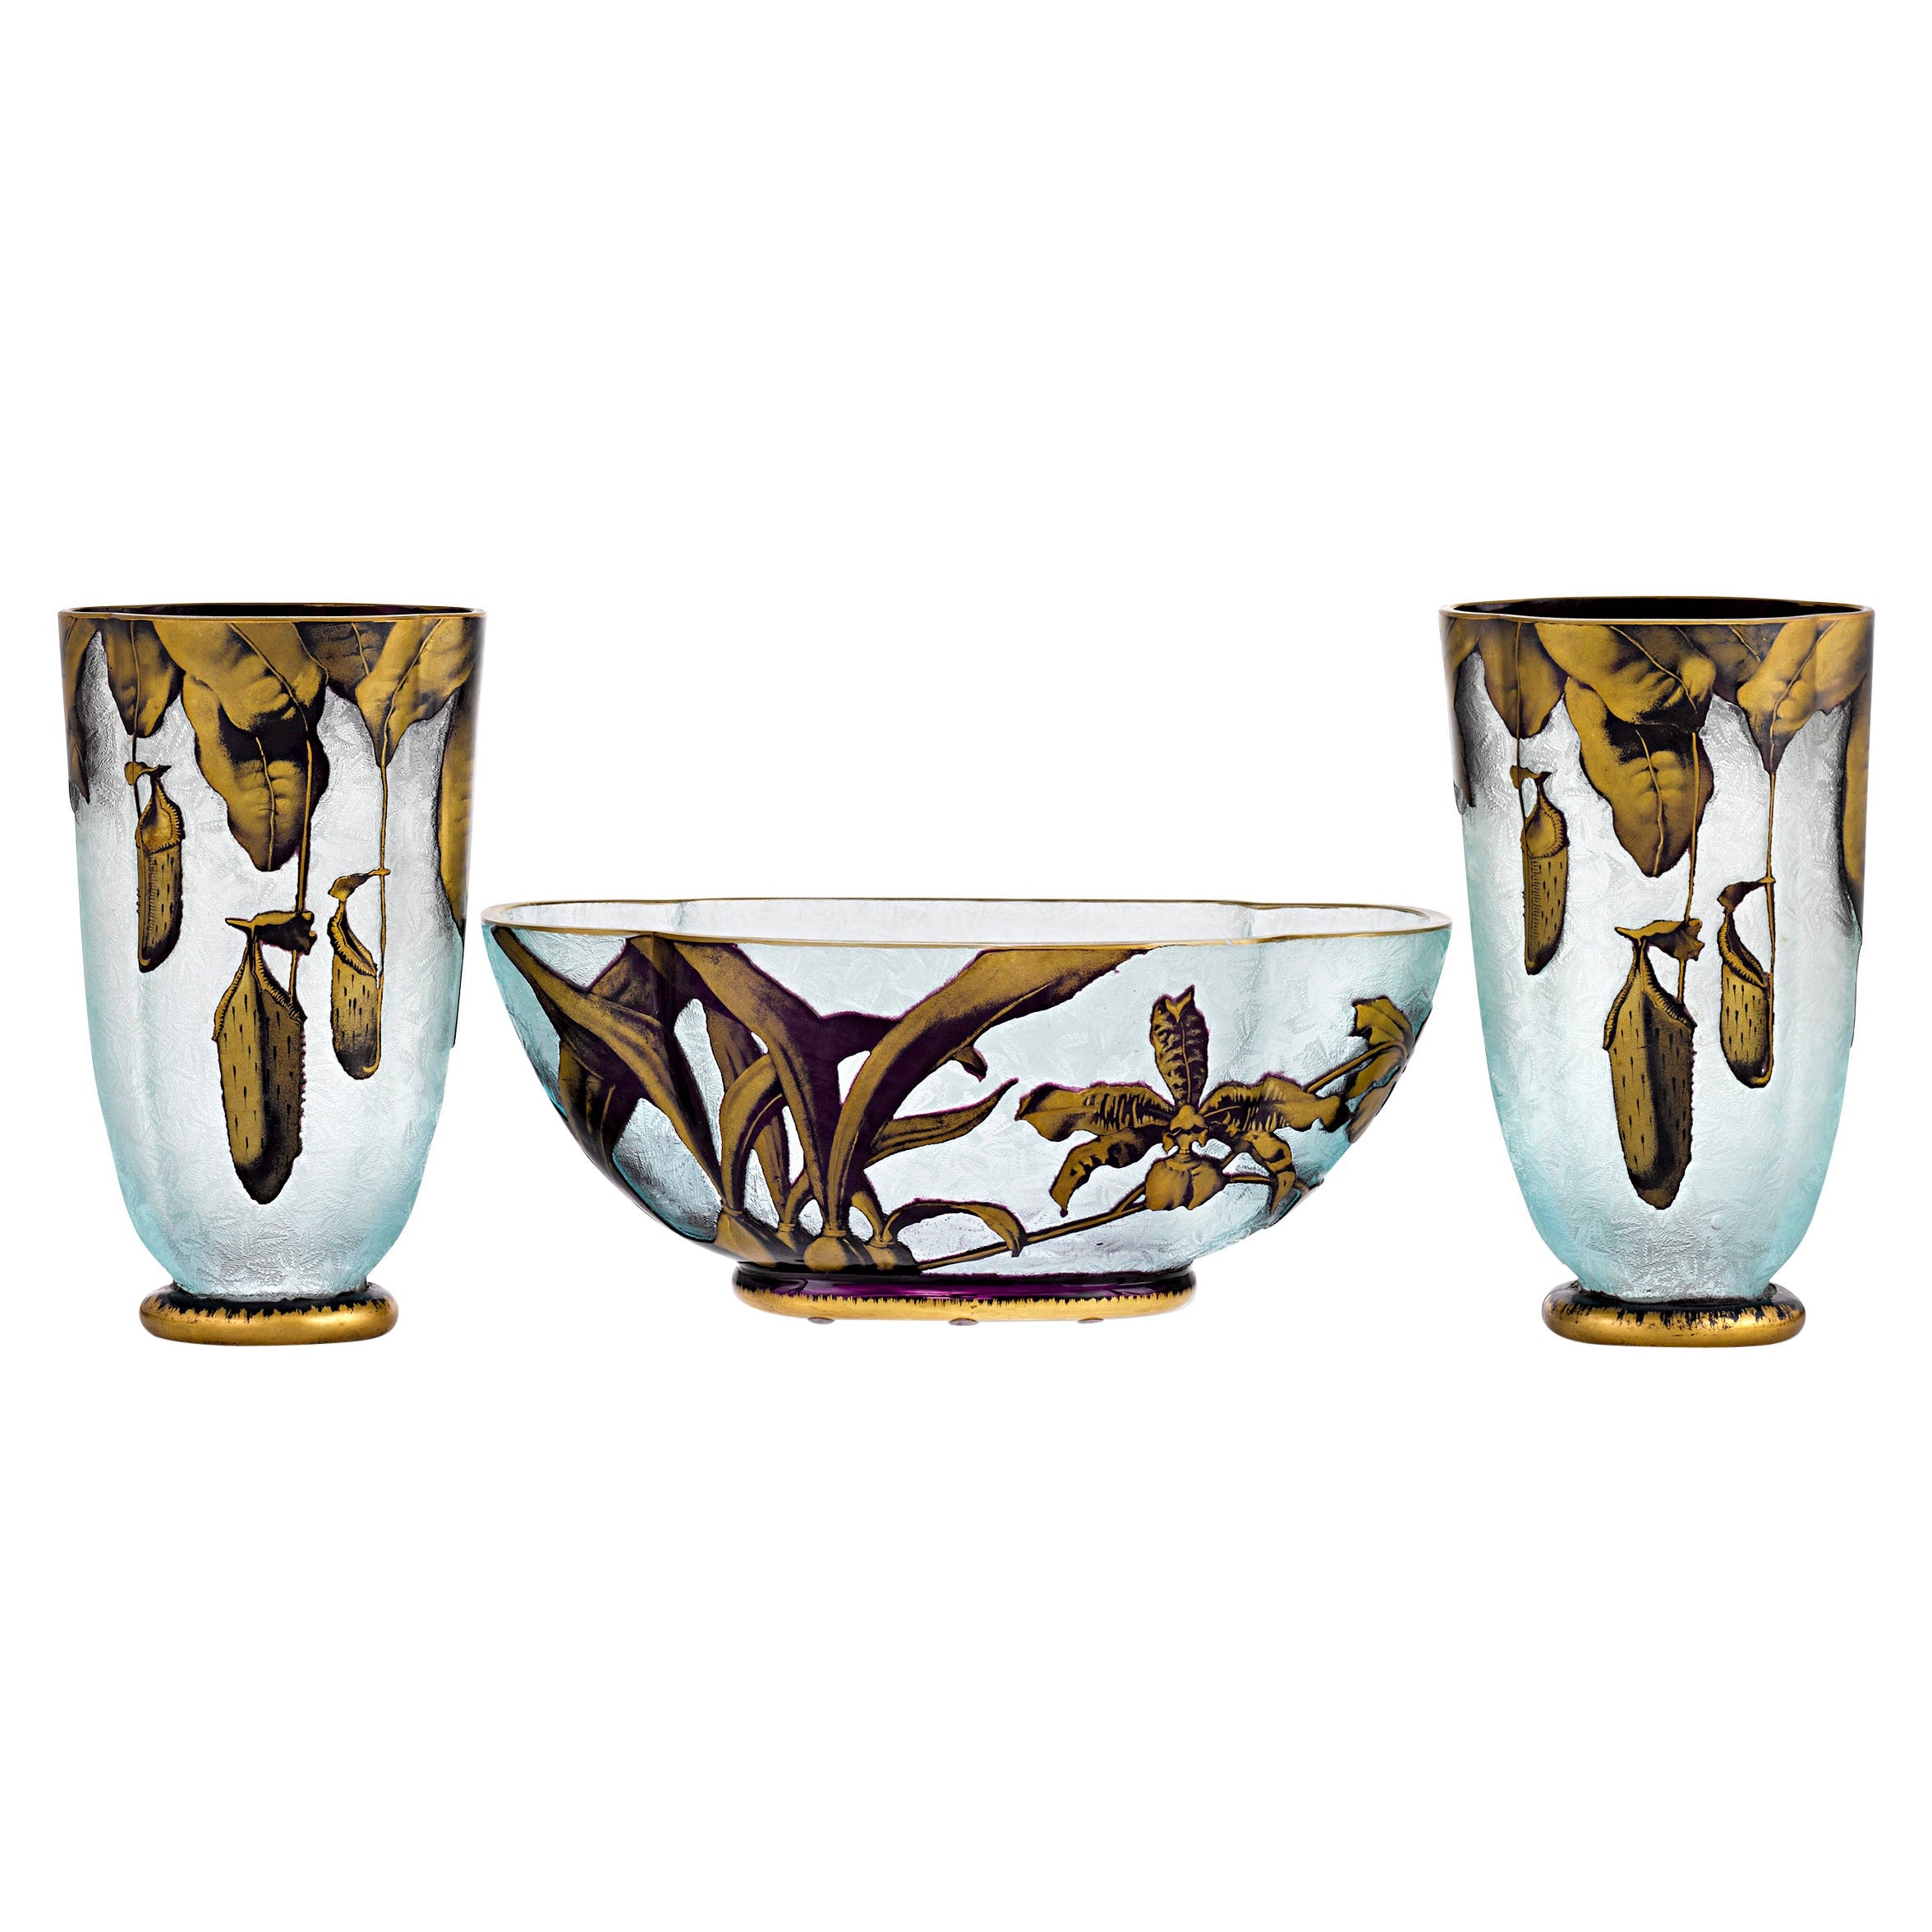 Nepenthes Garniture Set by Baccarat